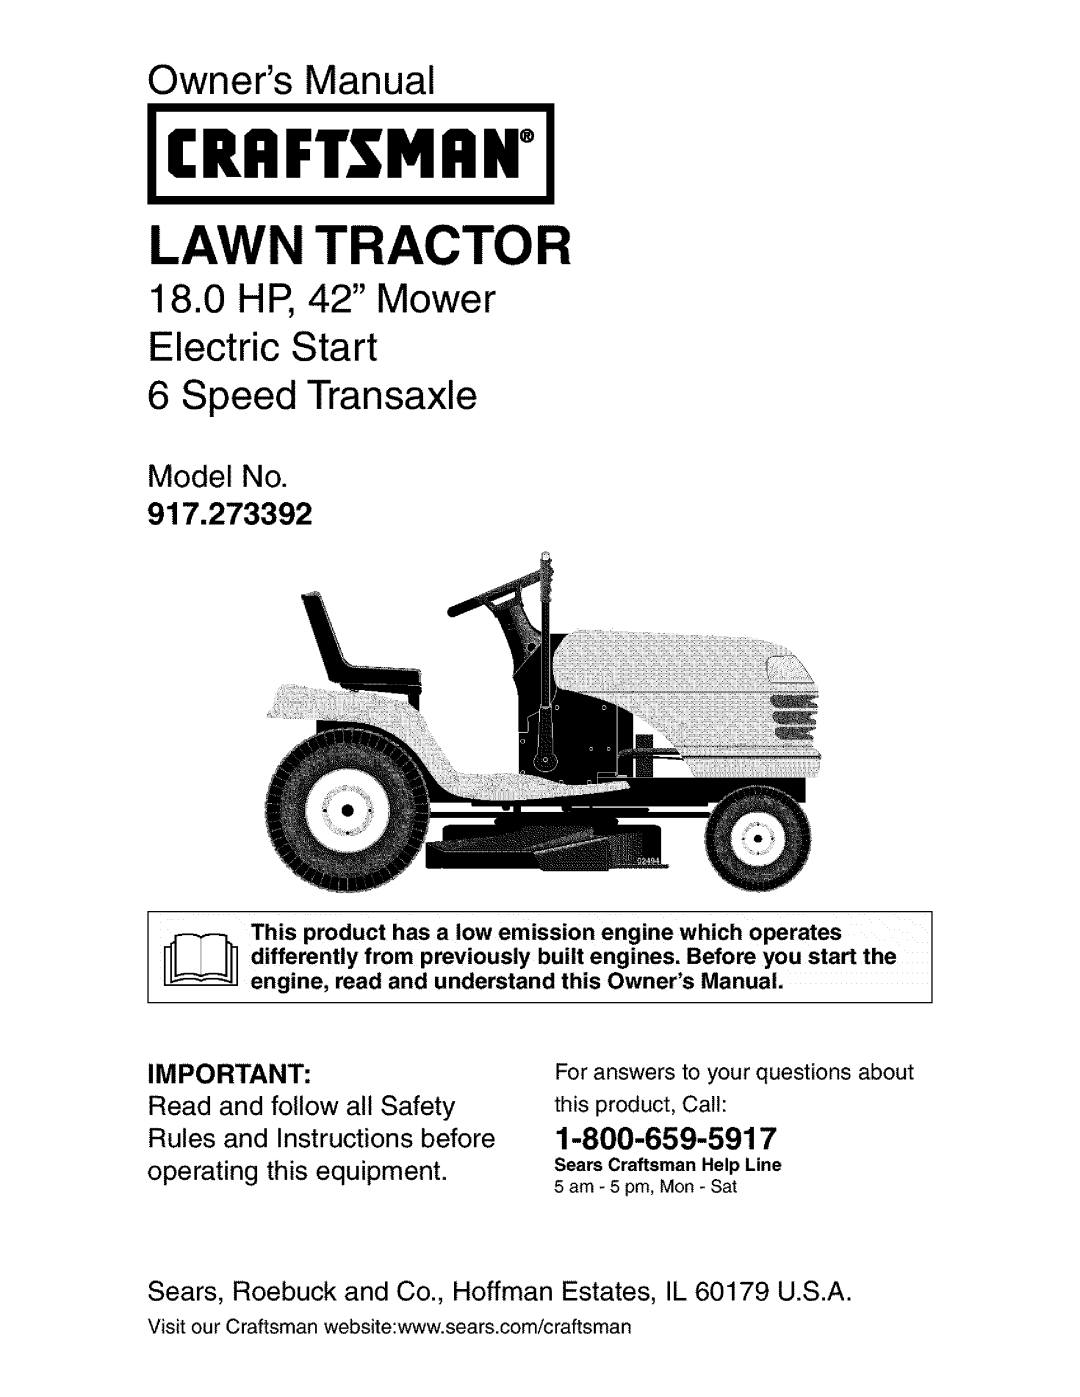 Craftsman 917.273392 manual 180HP, 42 Mower Electric Start, Model No, Read, and follow, all Safety, Rules, Jcriiftsmiinj 